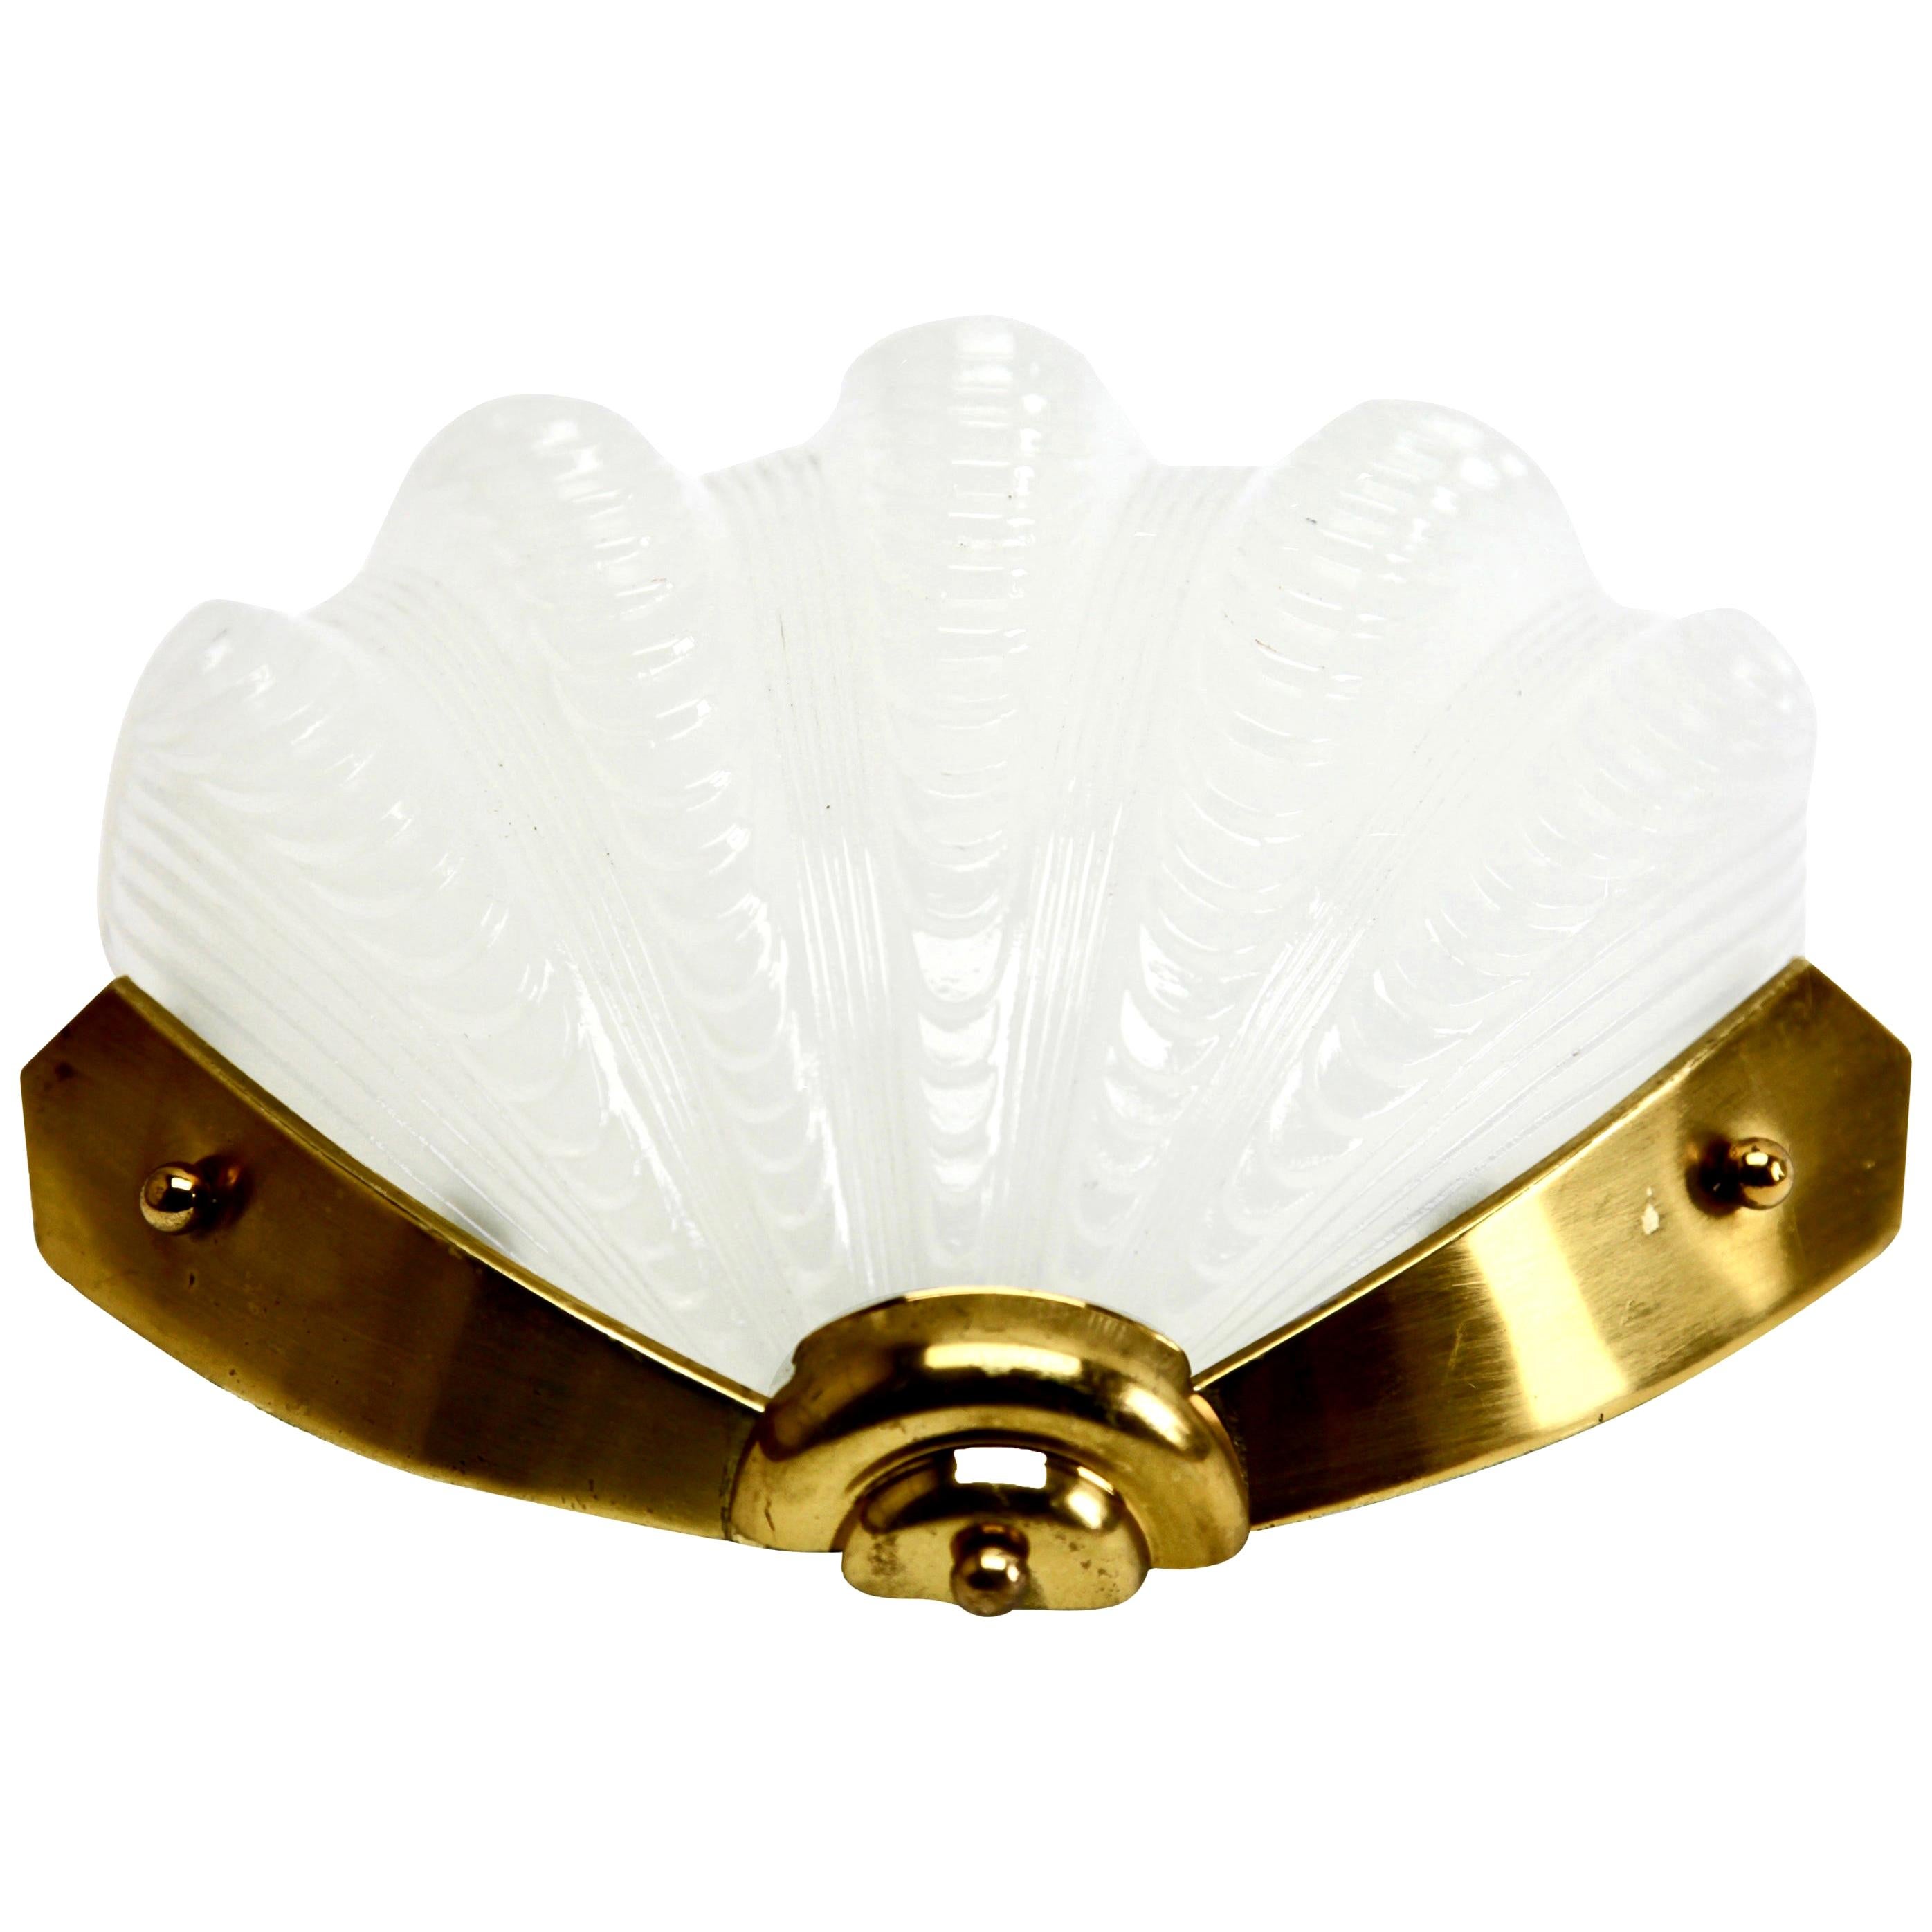 Opaque Art Deco Clamshell Wall Lamp with Brass Fittings